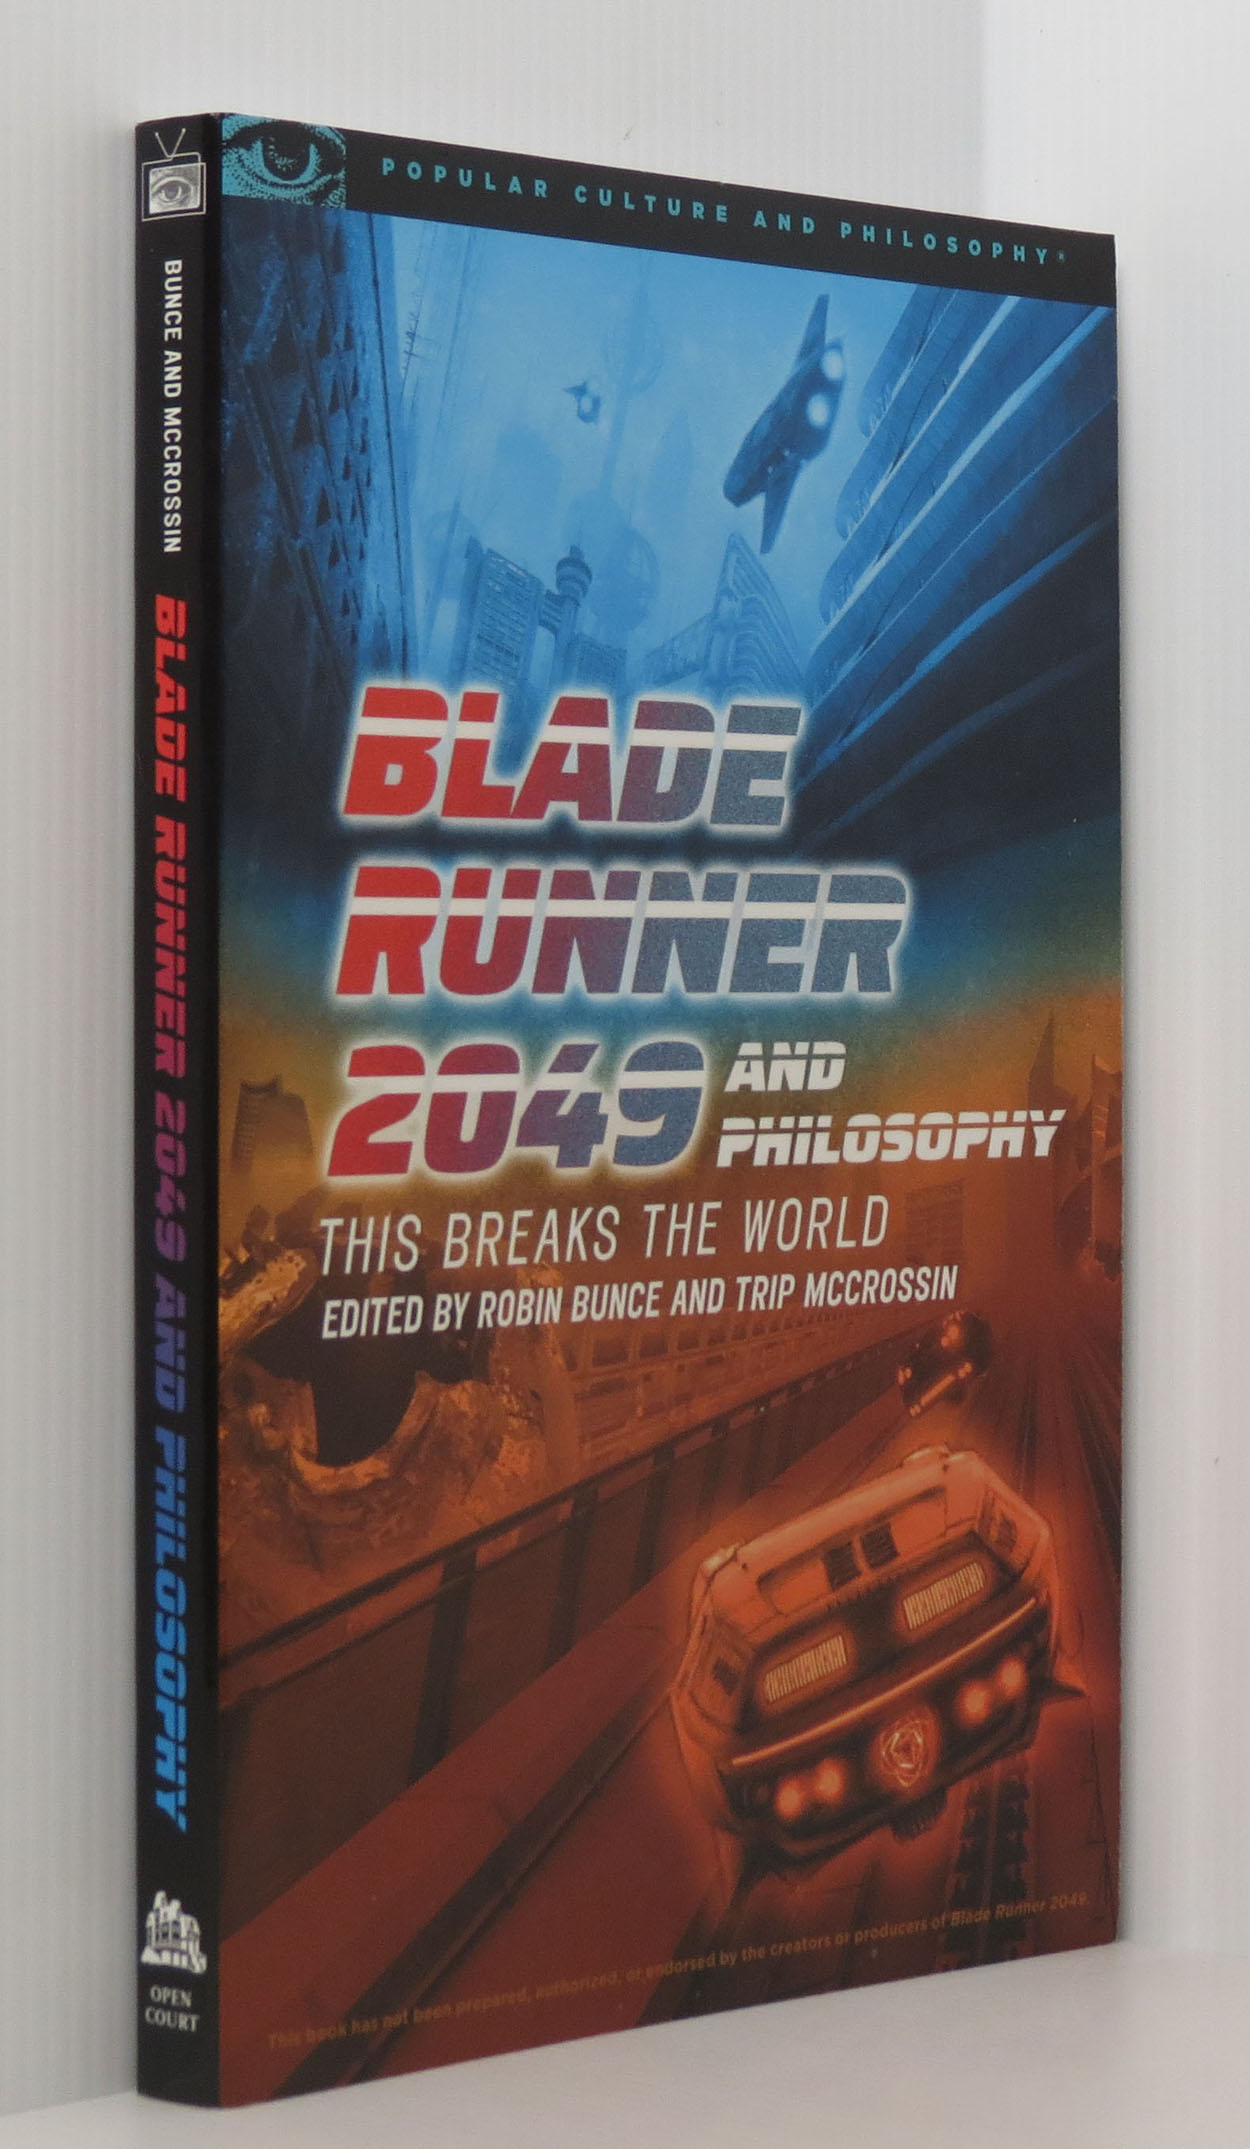 Image for Blade Runner 2049 and Philosophy: This Breaks the World (Popular Culture and Philosophy, No. 127)